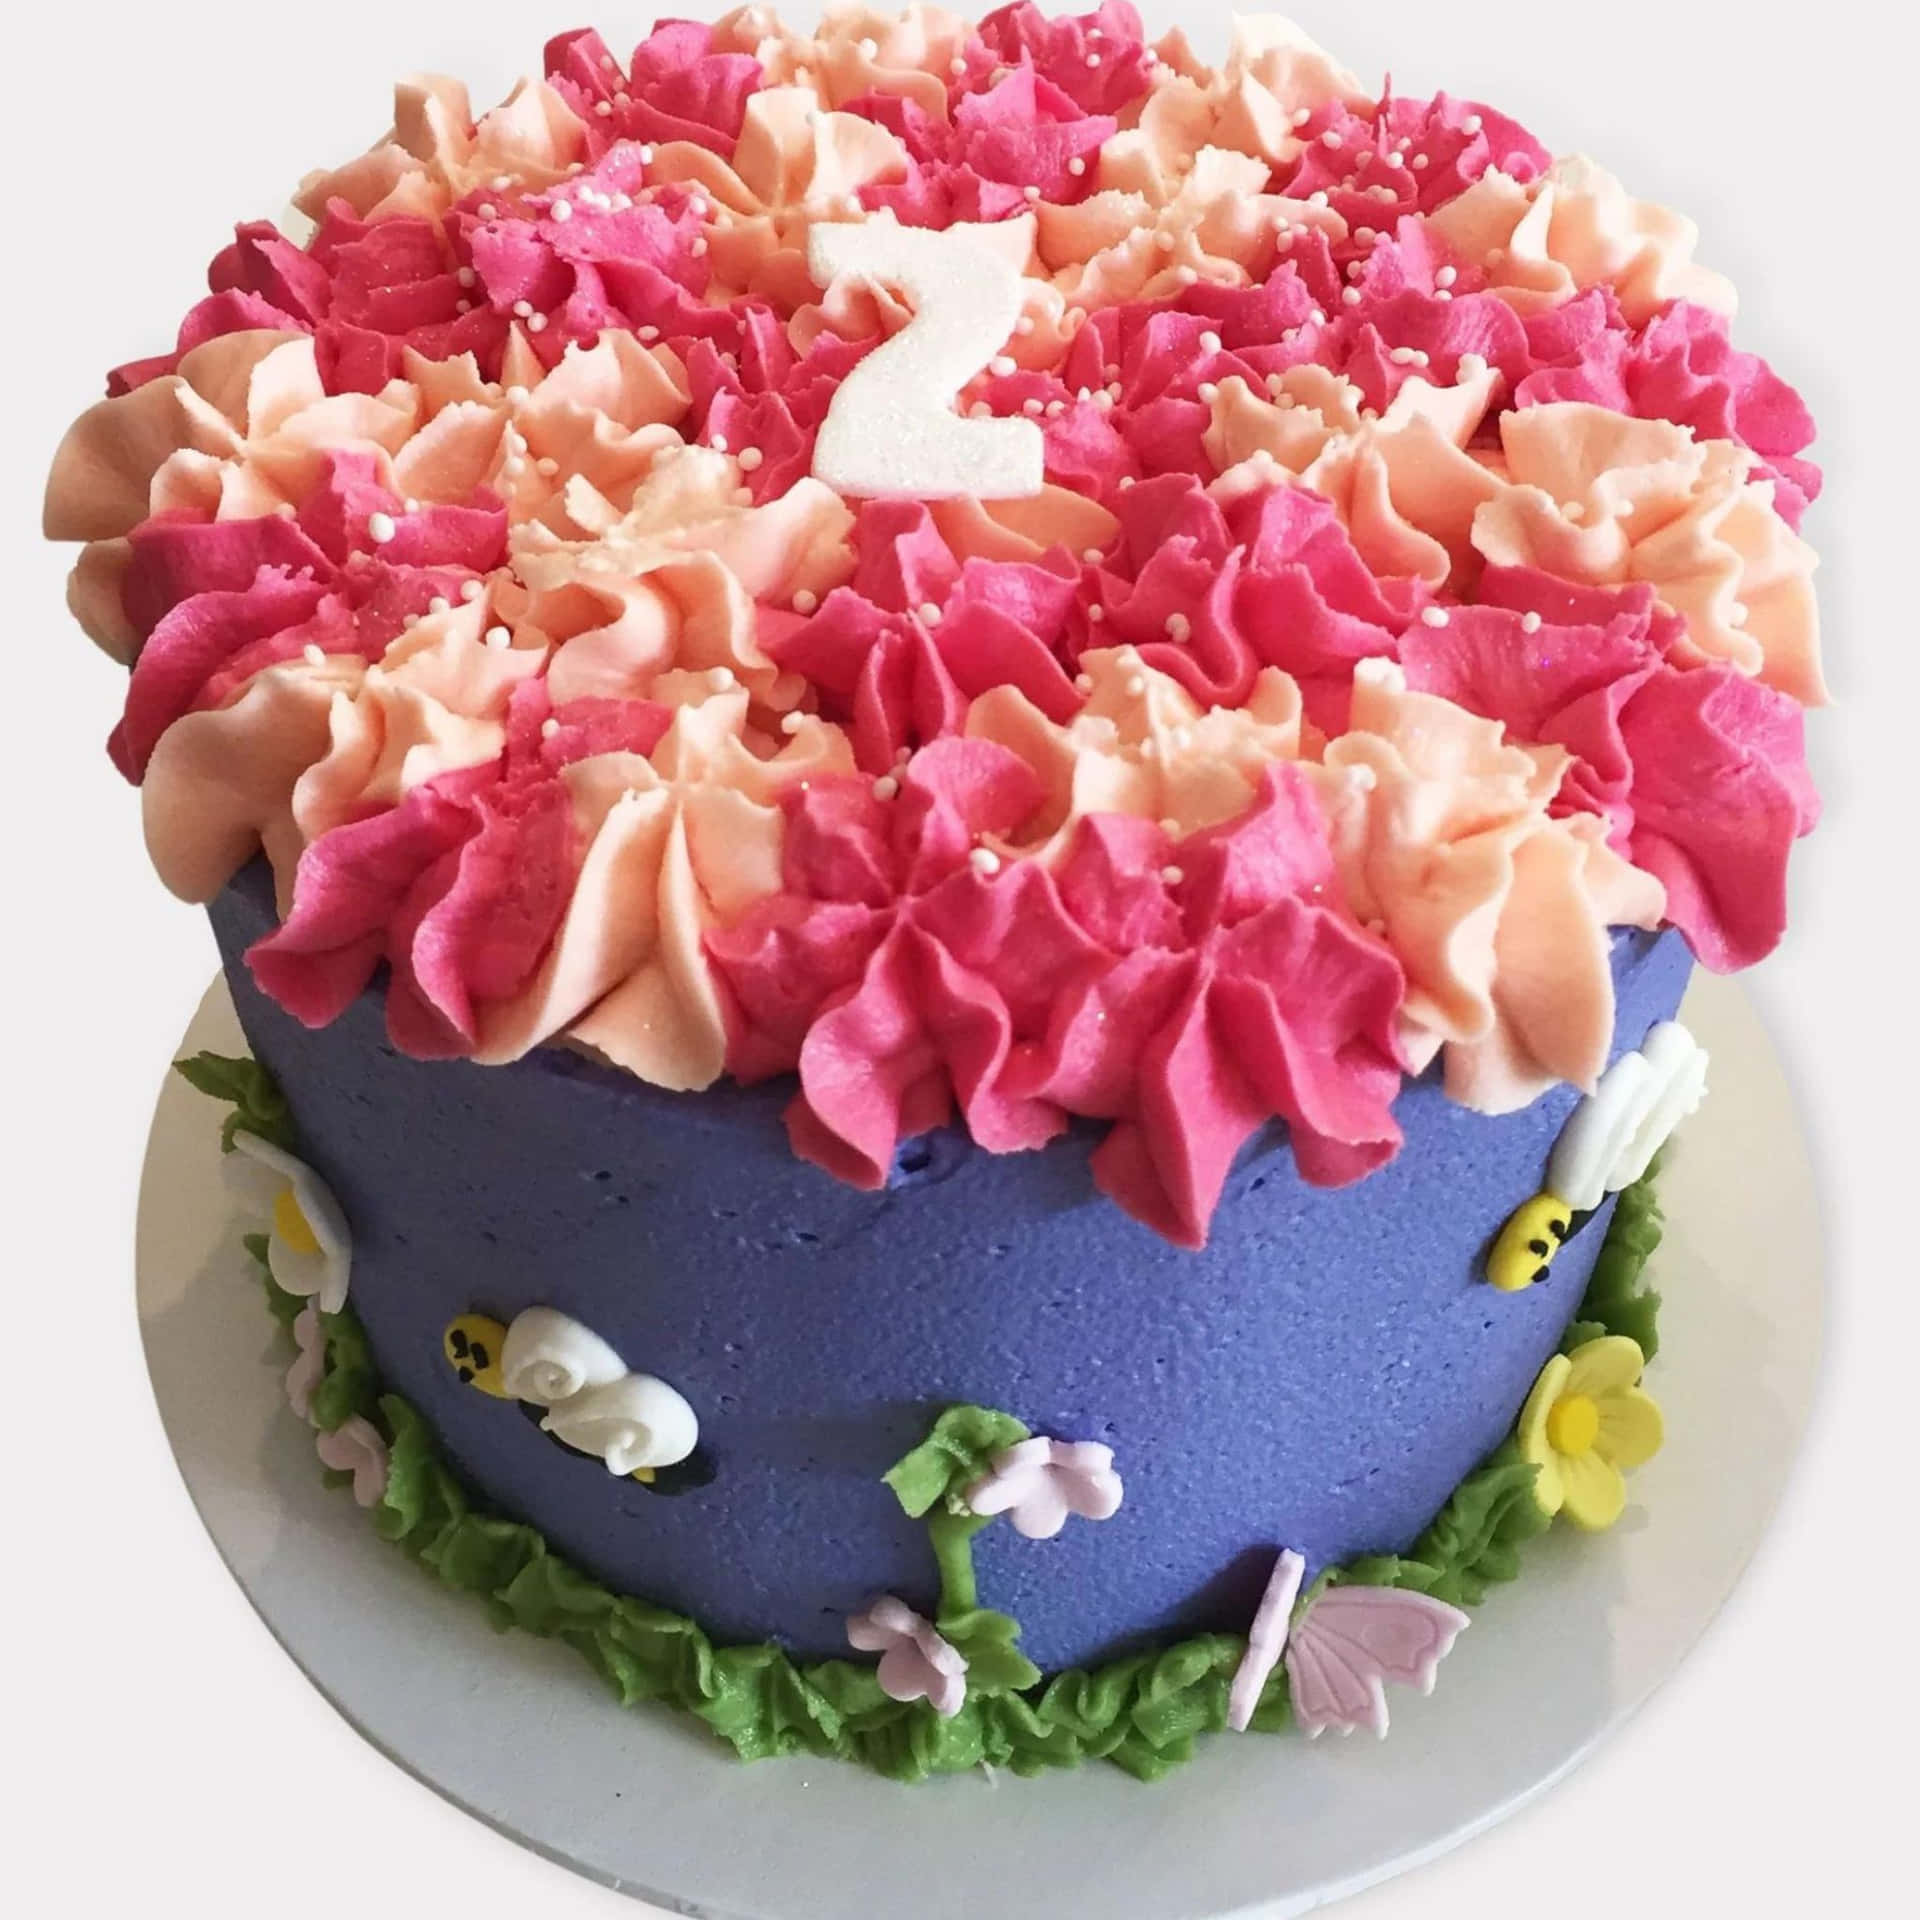 A Beautiful Floral Cake for a Special Occasion Wallpaper